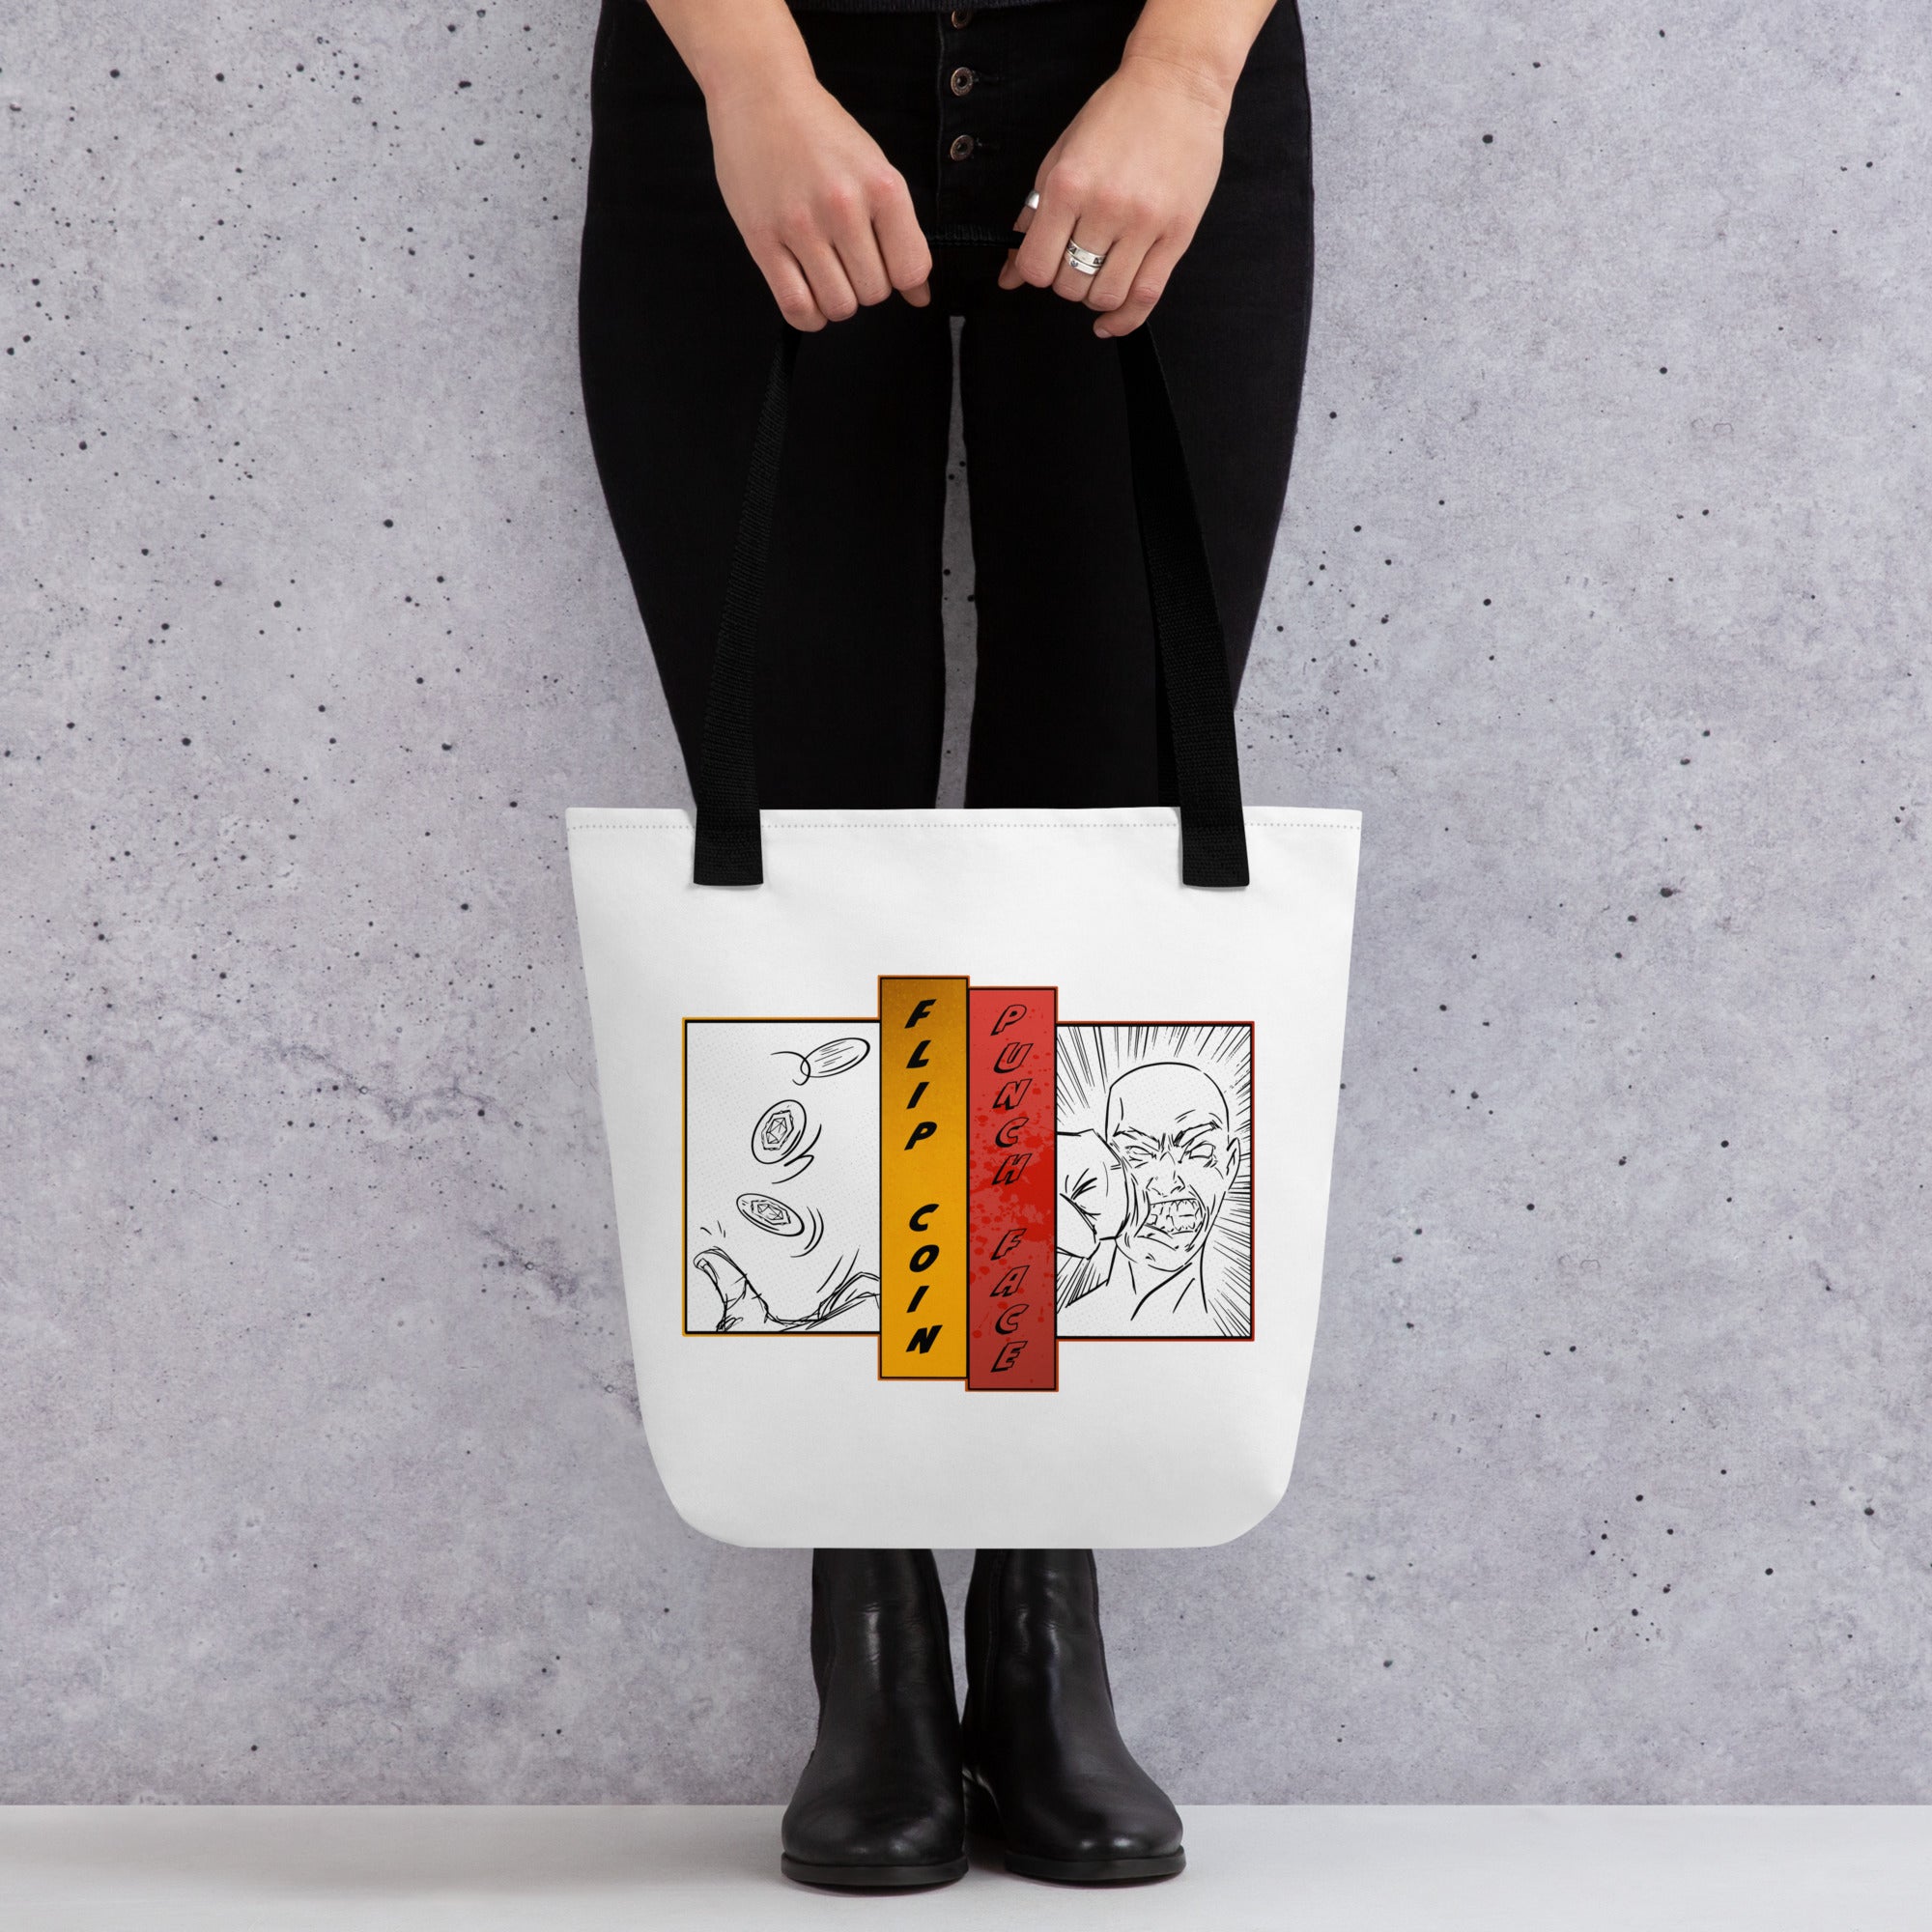 Flip Coin Punch Face Tote